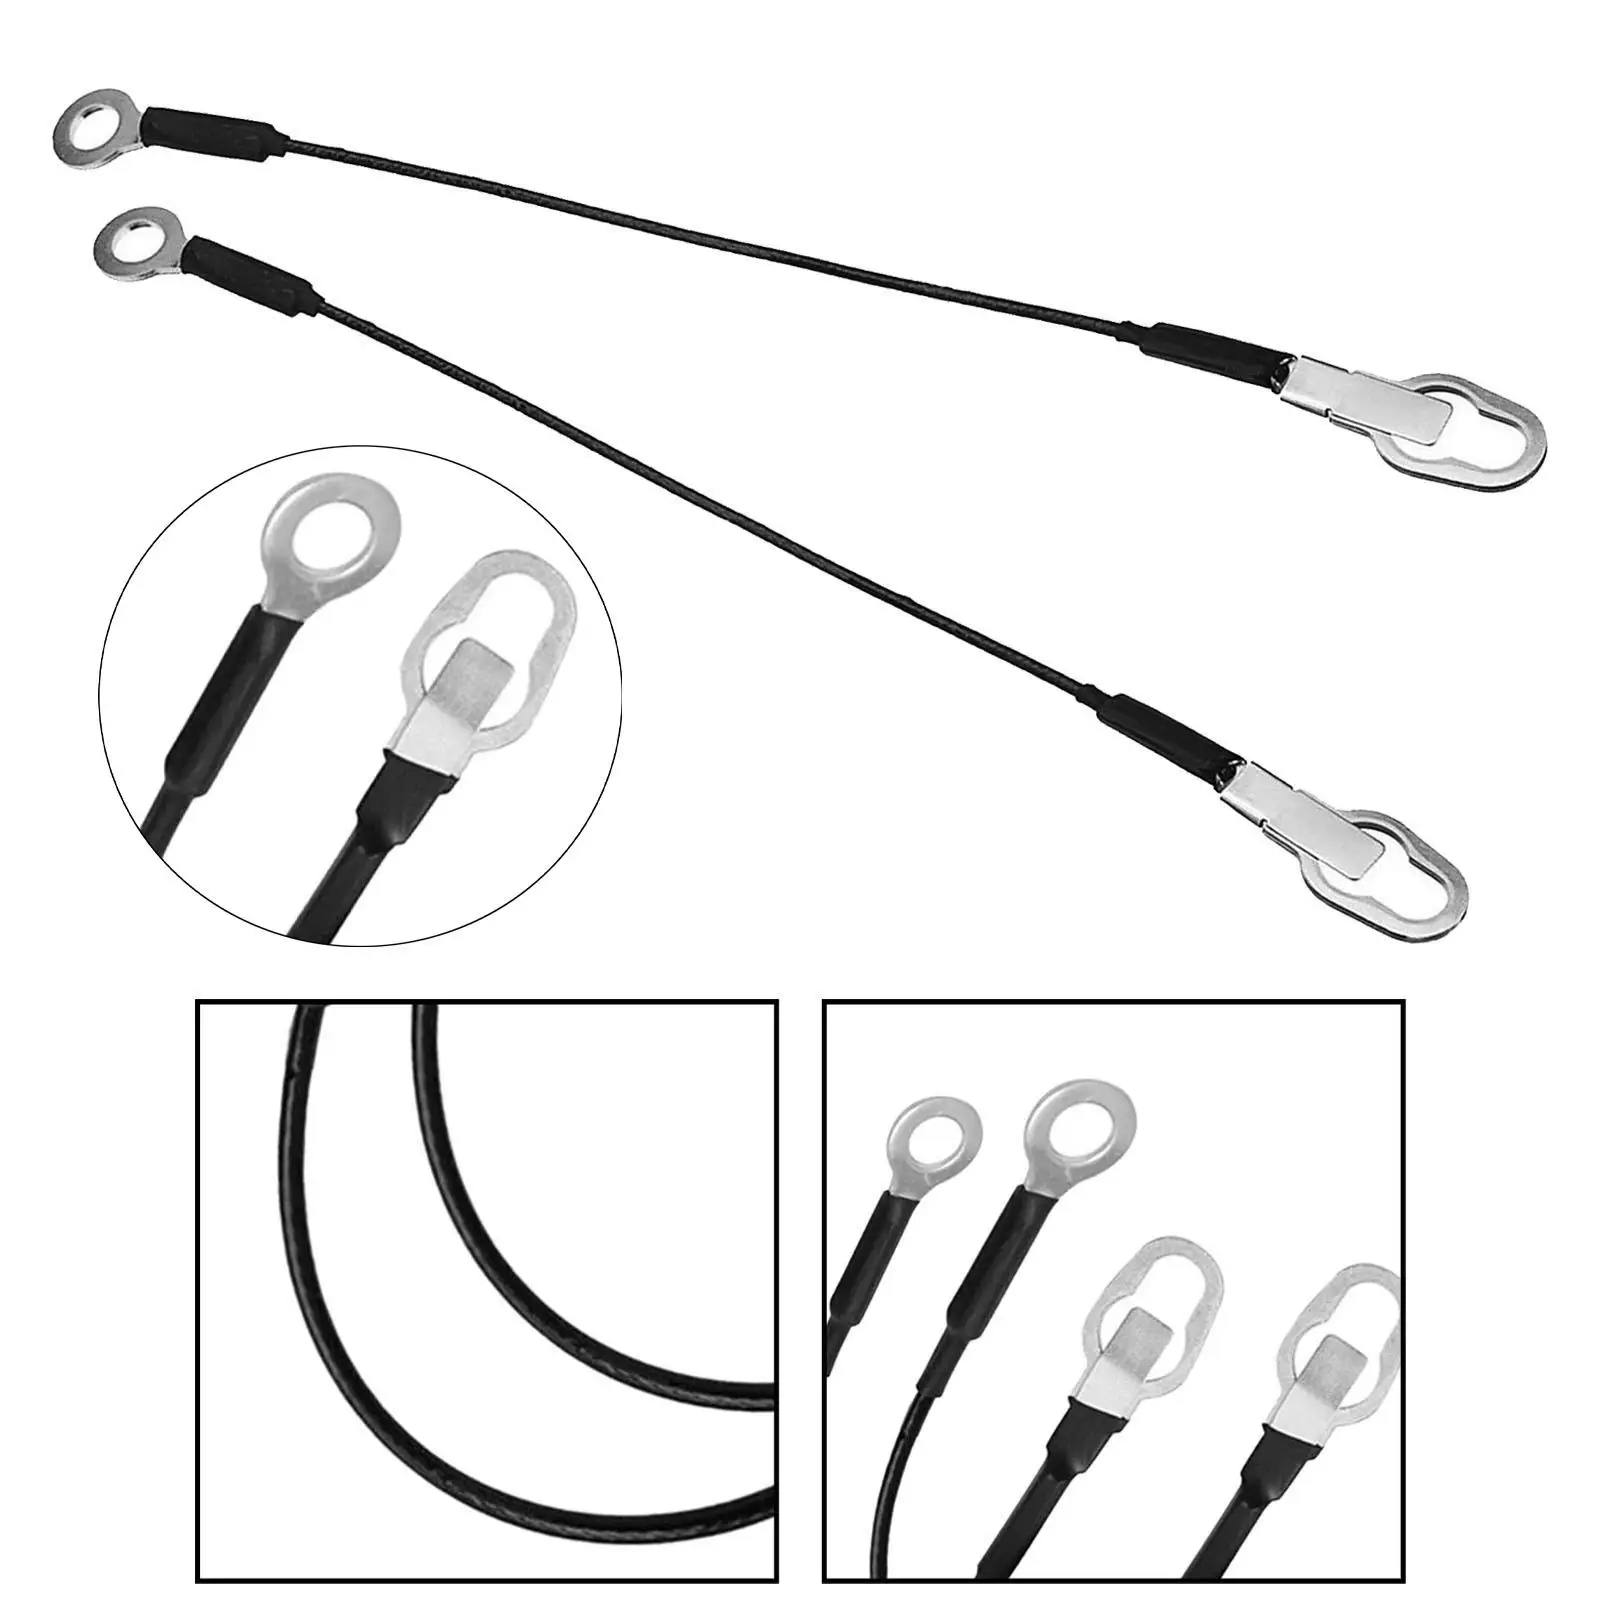 2x Rear Tailgate Cables F37Z9943053A Left Right Directly Replace Parts for Ford Ranger Pickup Truck 1993-2011 Easy to Install